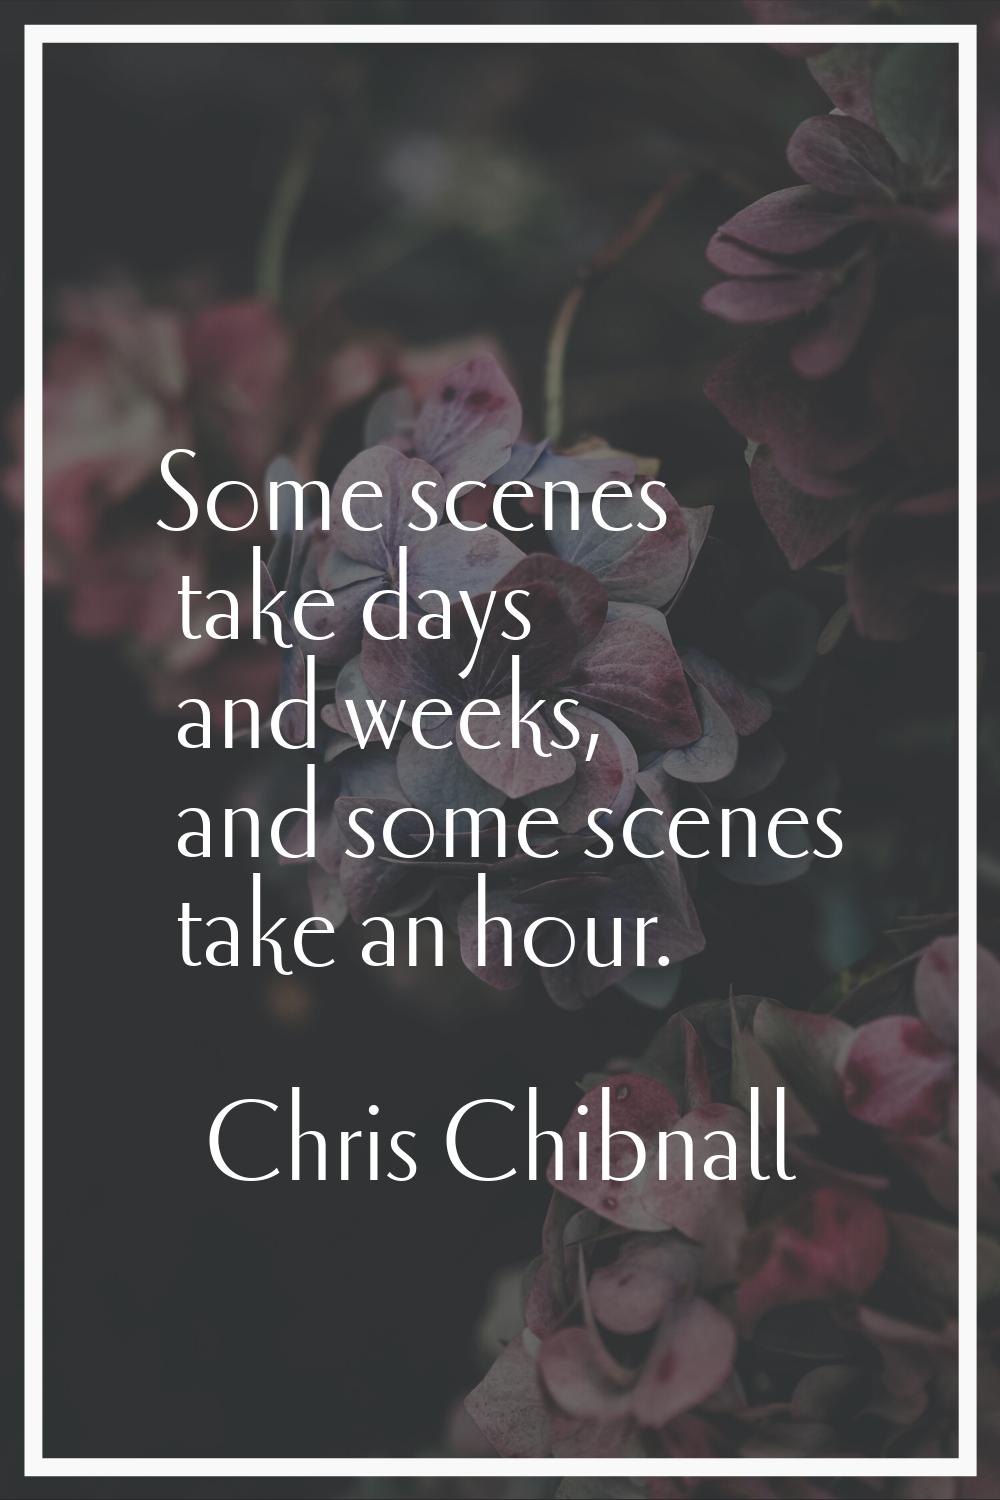 Some scenes take days and weeks, and some scenes take an hour.